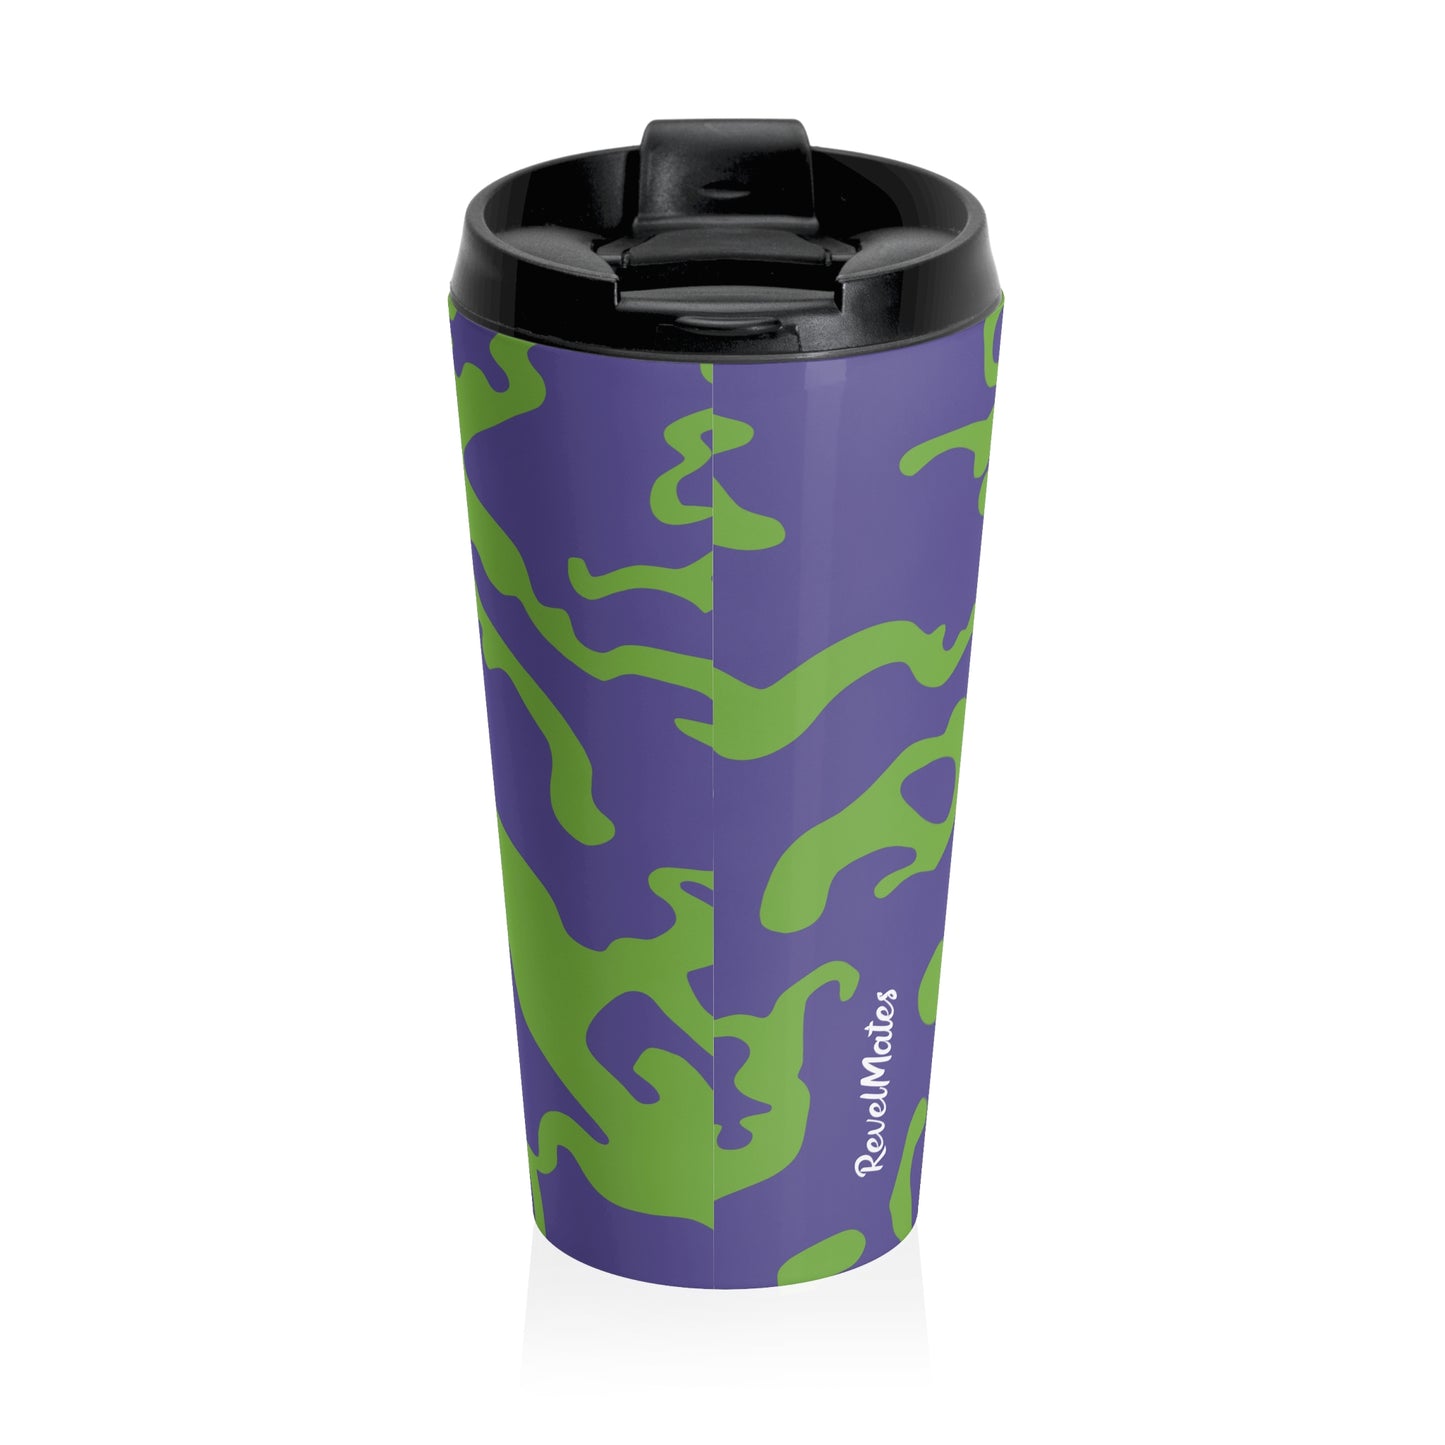 Stainless Steel Travel Mug With Cup 15oz (440ml)| Camouflage Lavender & Lime Design